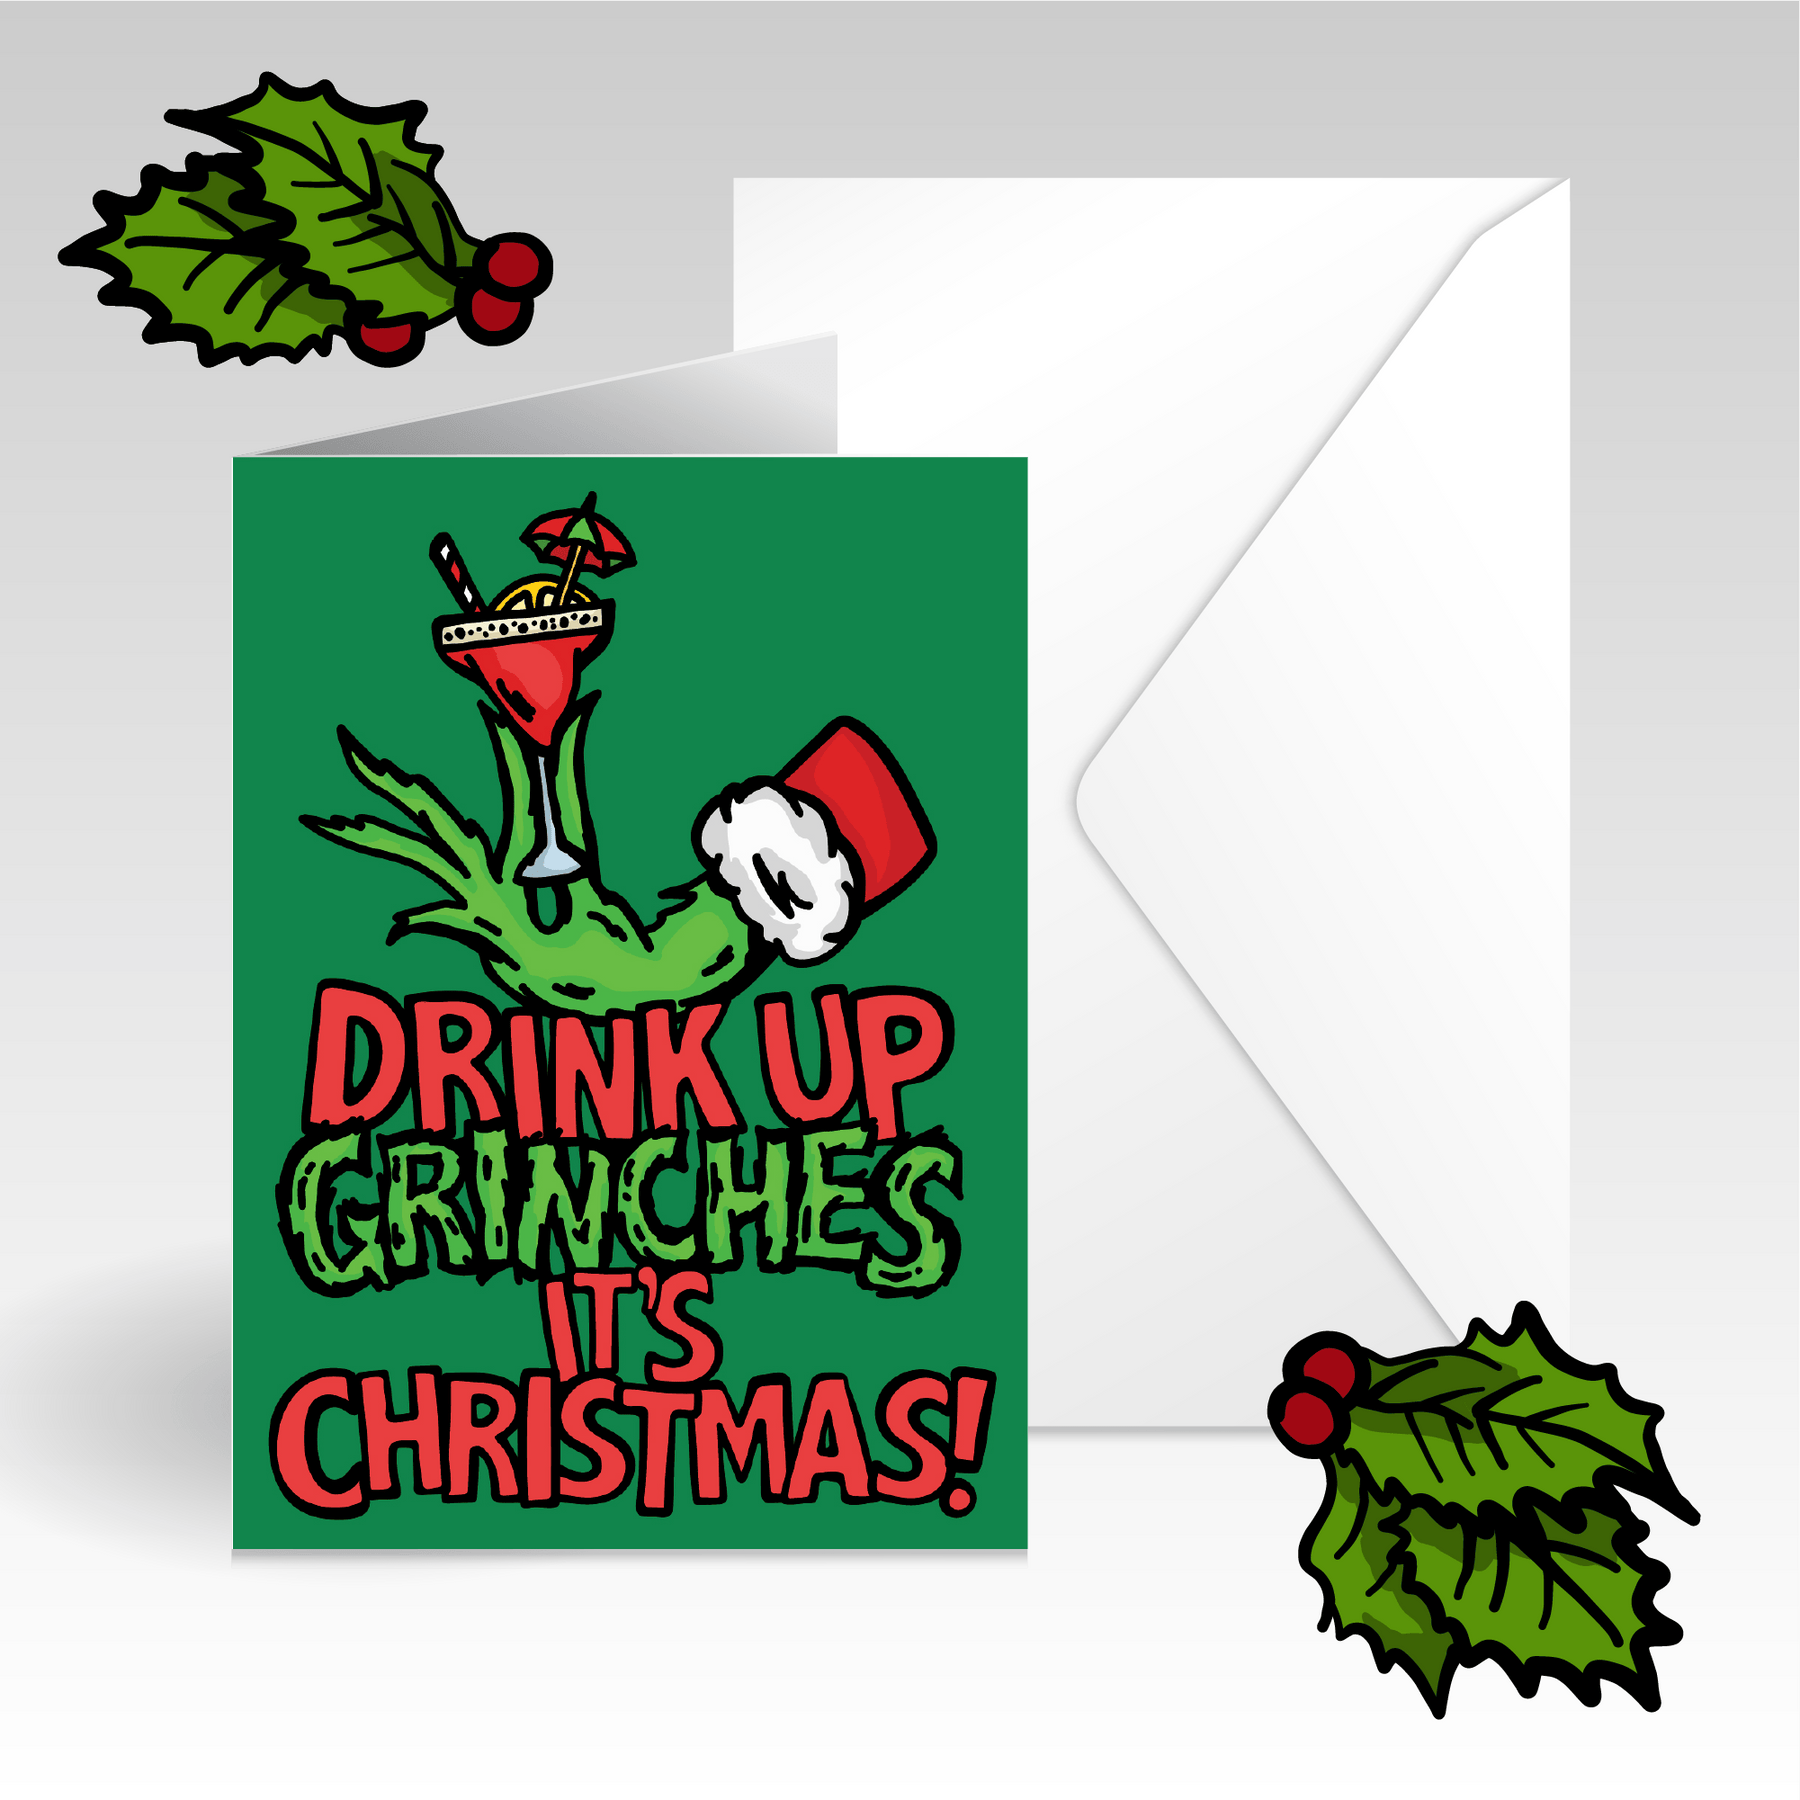 Drink Up Grinches 😈🎄 - Christmas Card